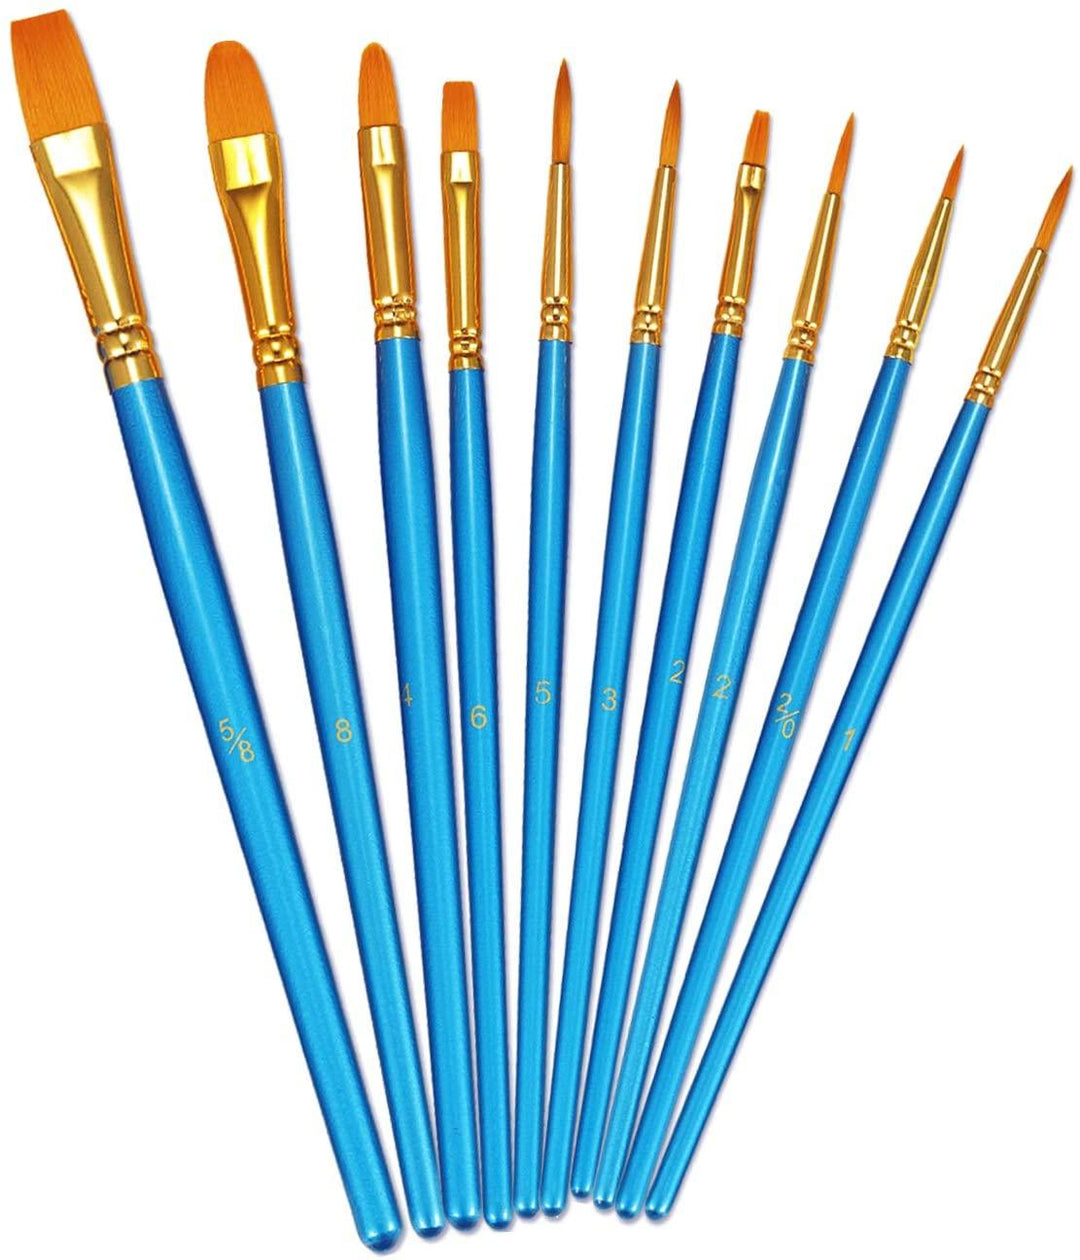 Premium Paint Brushes (10-Pack) - Crafty By Numbers - Paint by Numbers - Paint by Numbers for Adults - Painting - Canvas - Custom Paint by Numbers